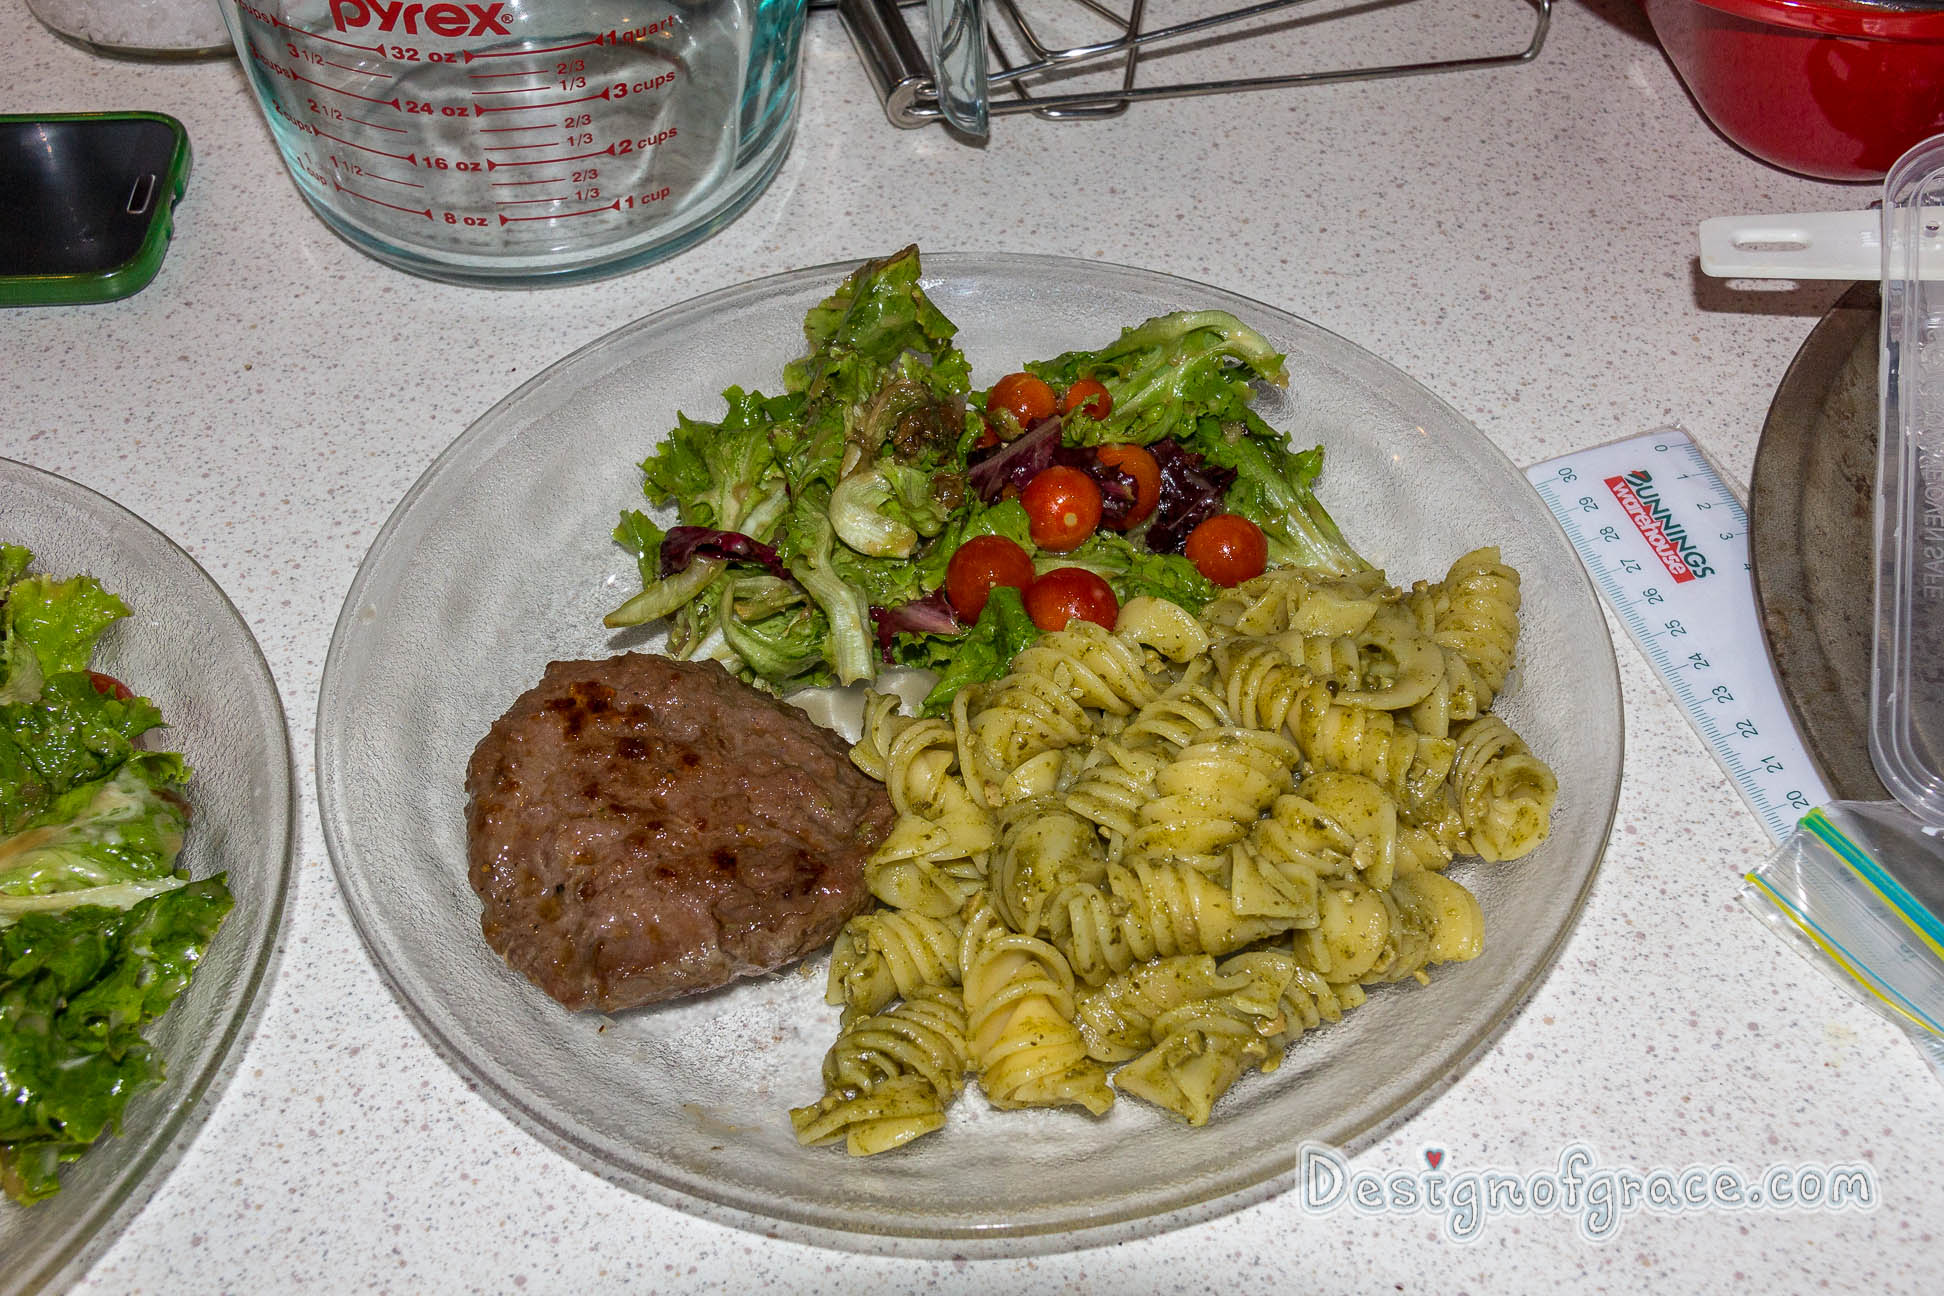 a plate of food with a kangaroo patty on the left which has been nicely browned with pesto pasta on the right and the home grown green and red lettuce and cherry tomatoes on top of the plate